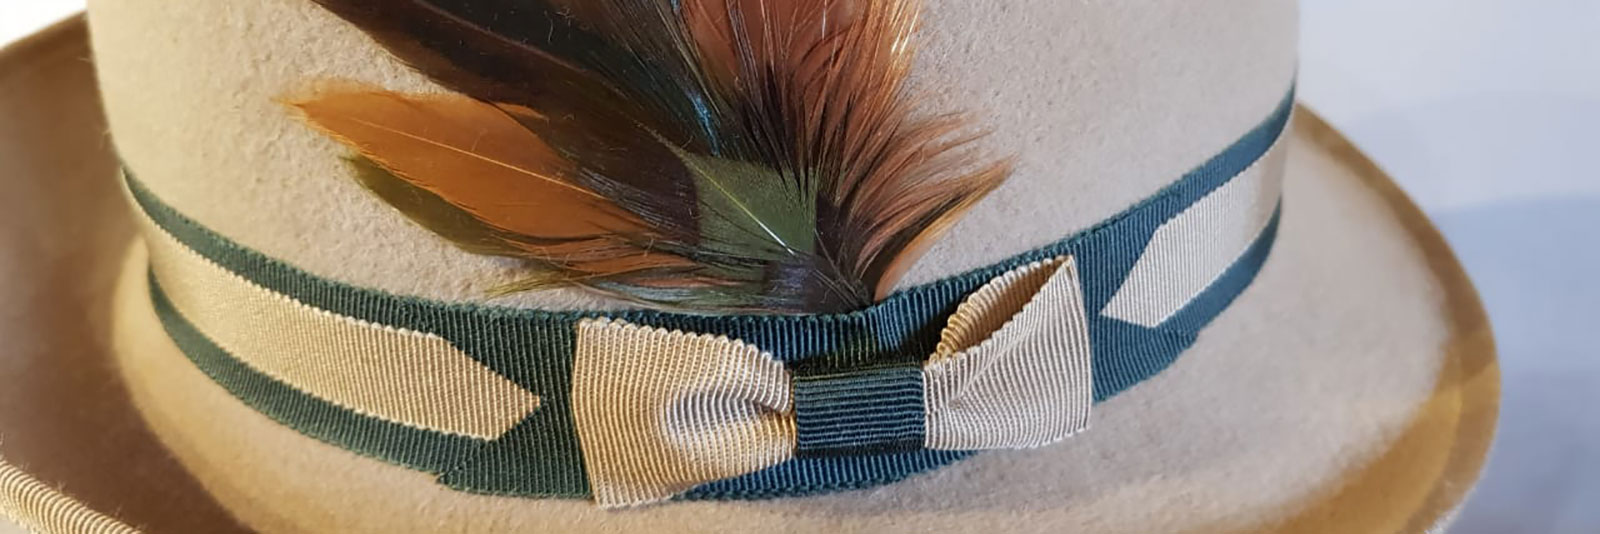 cream trilby close up showing ribbon and feather decoration